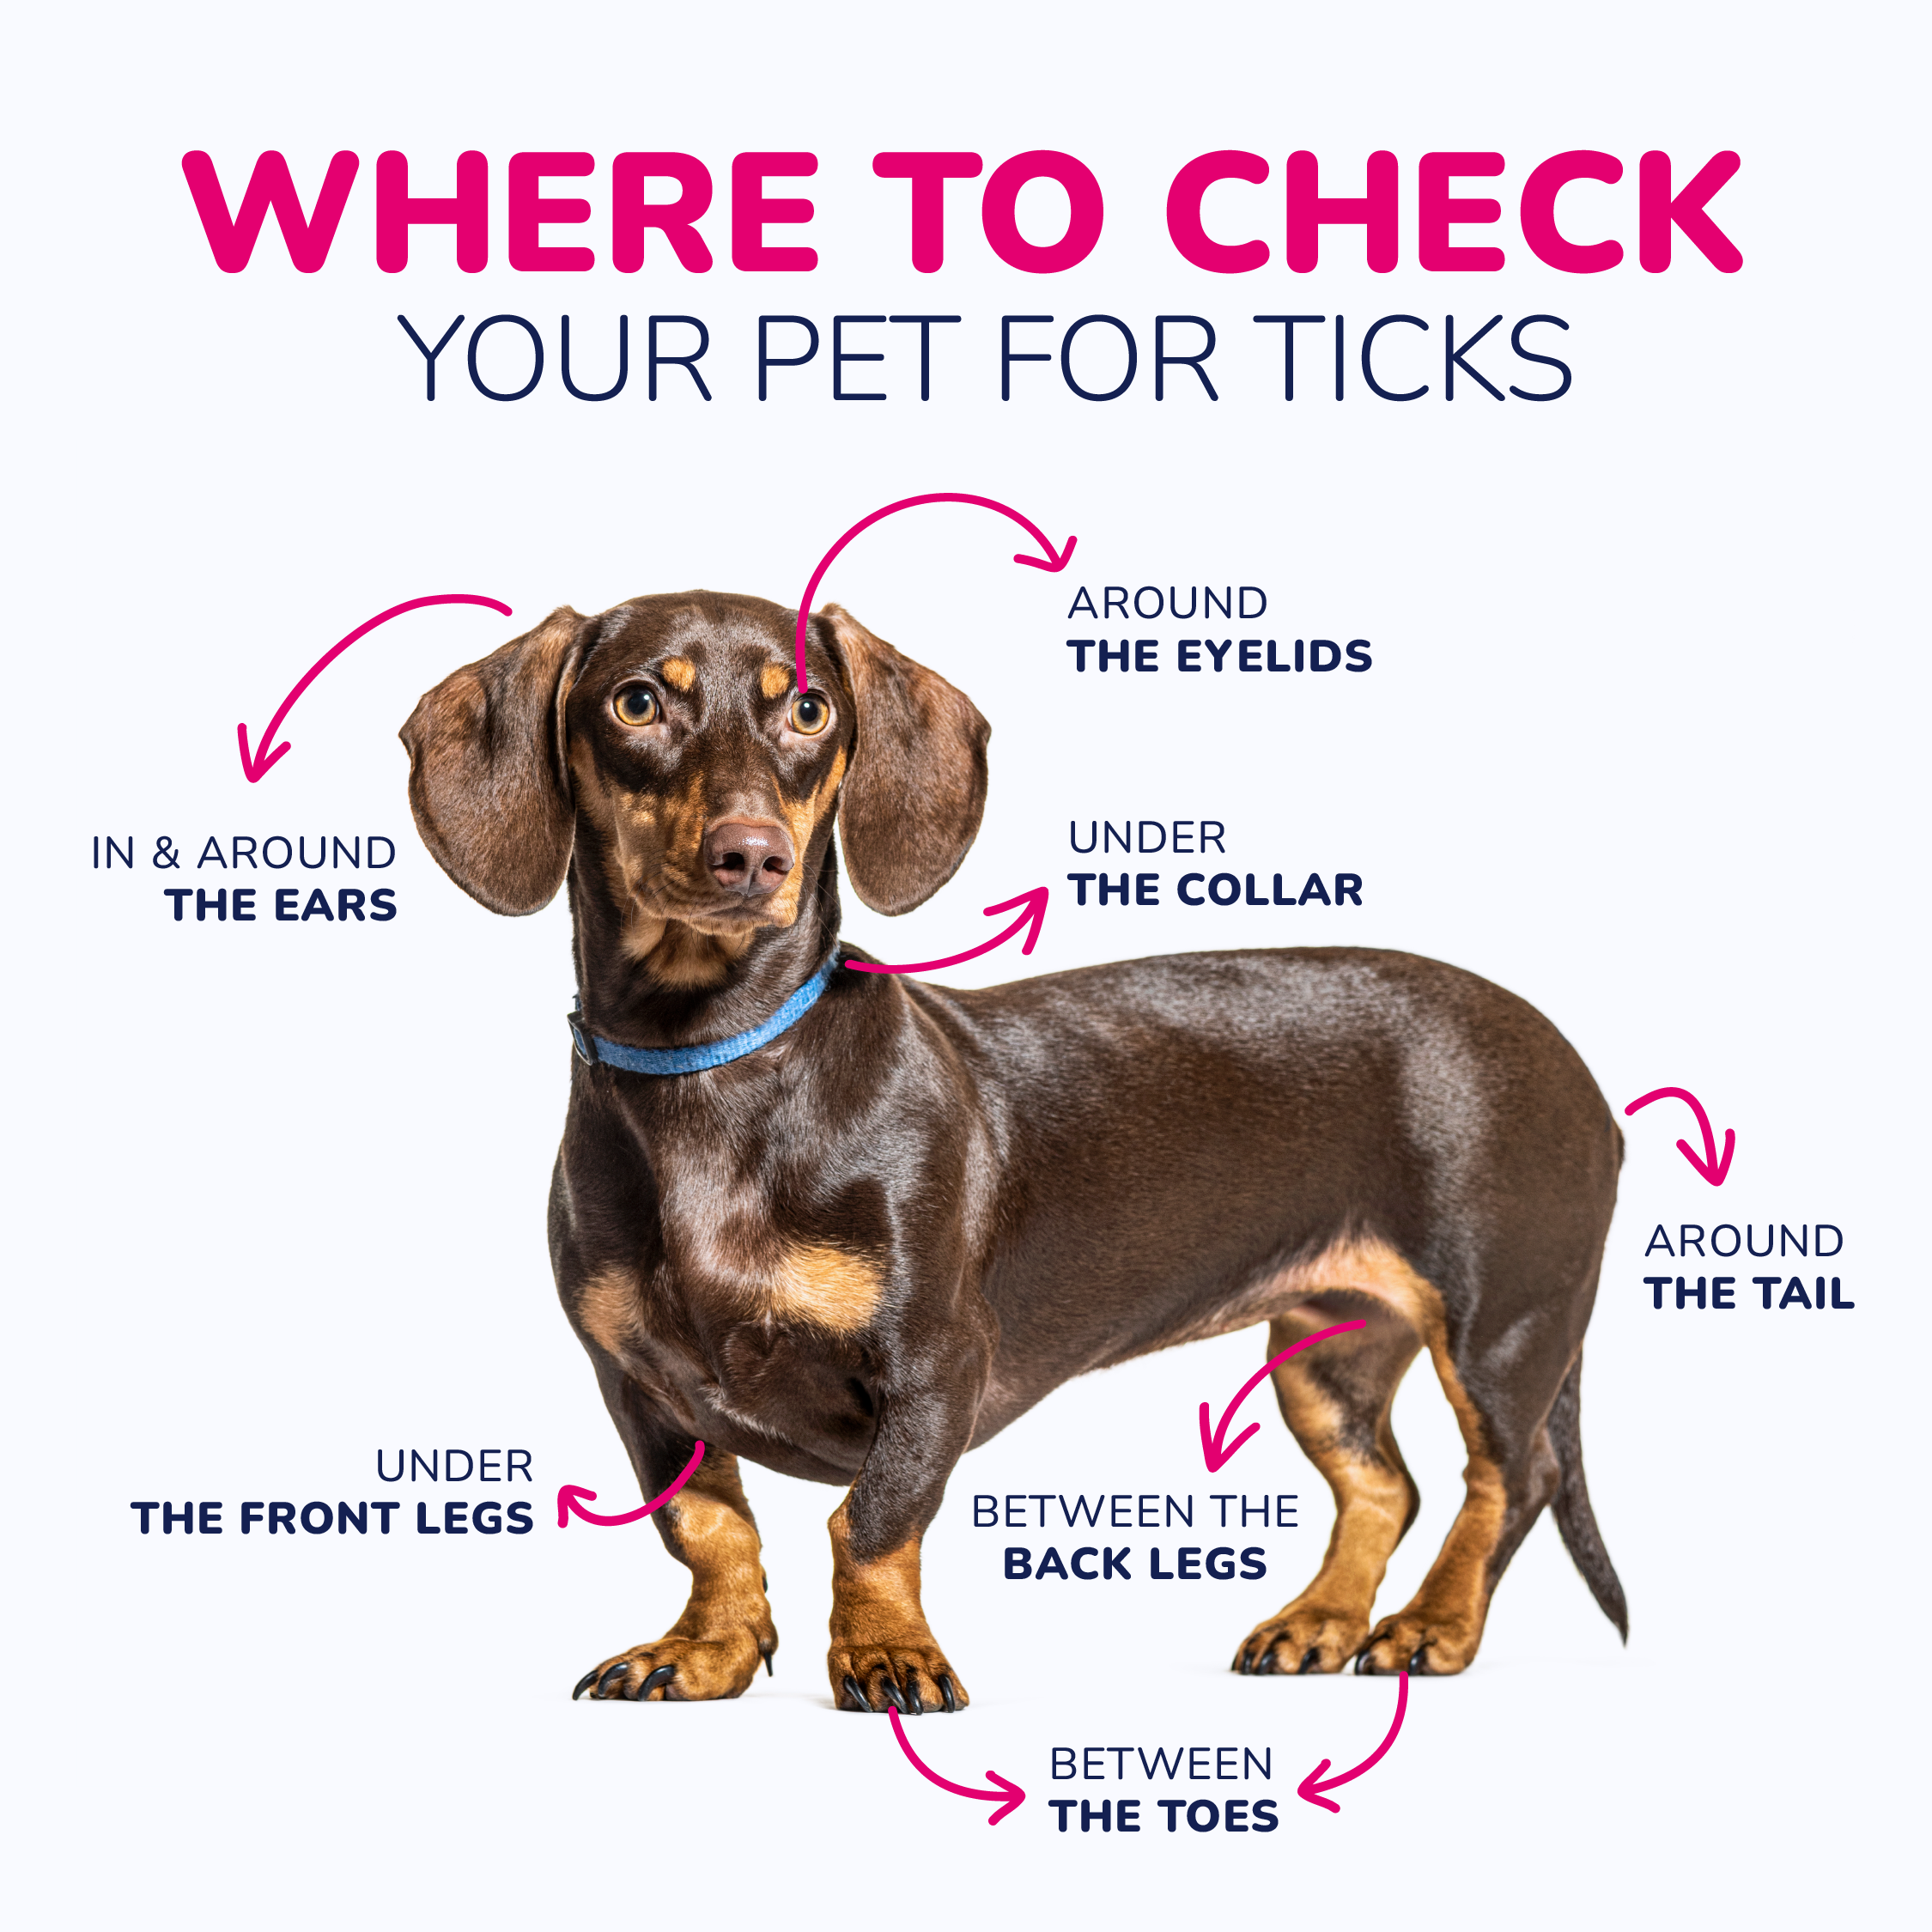 An infographic about where to check your pet for ticks, the common body parts a tick can be found.